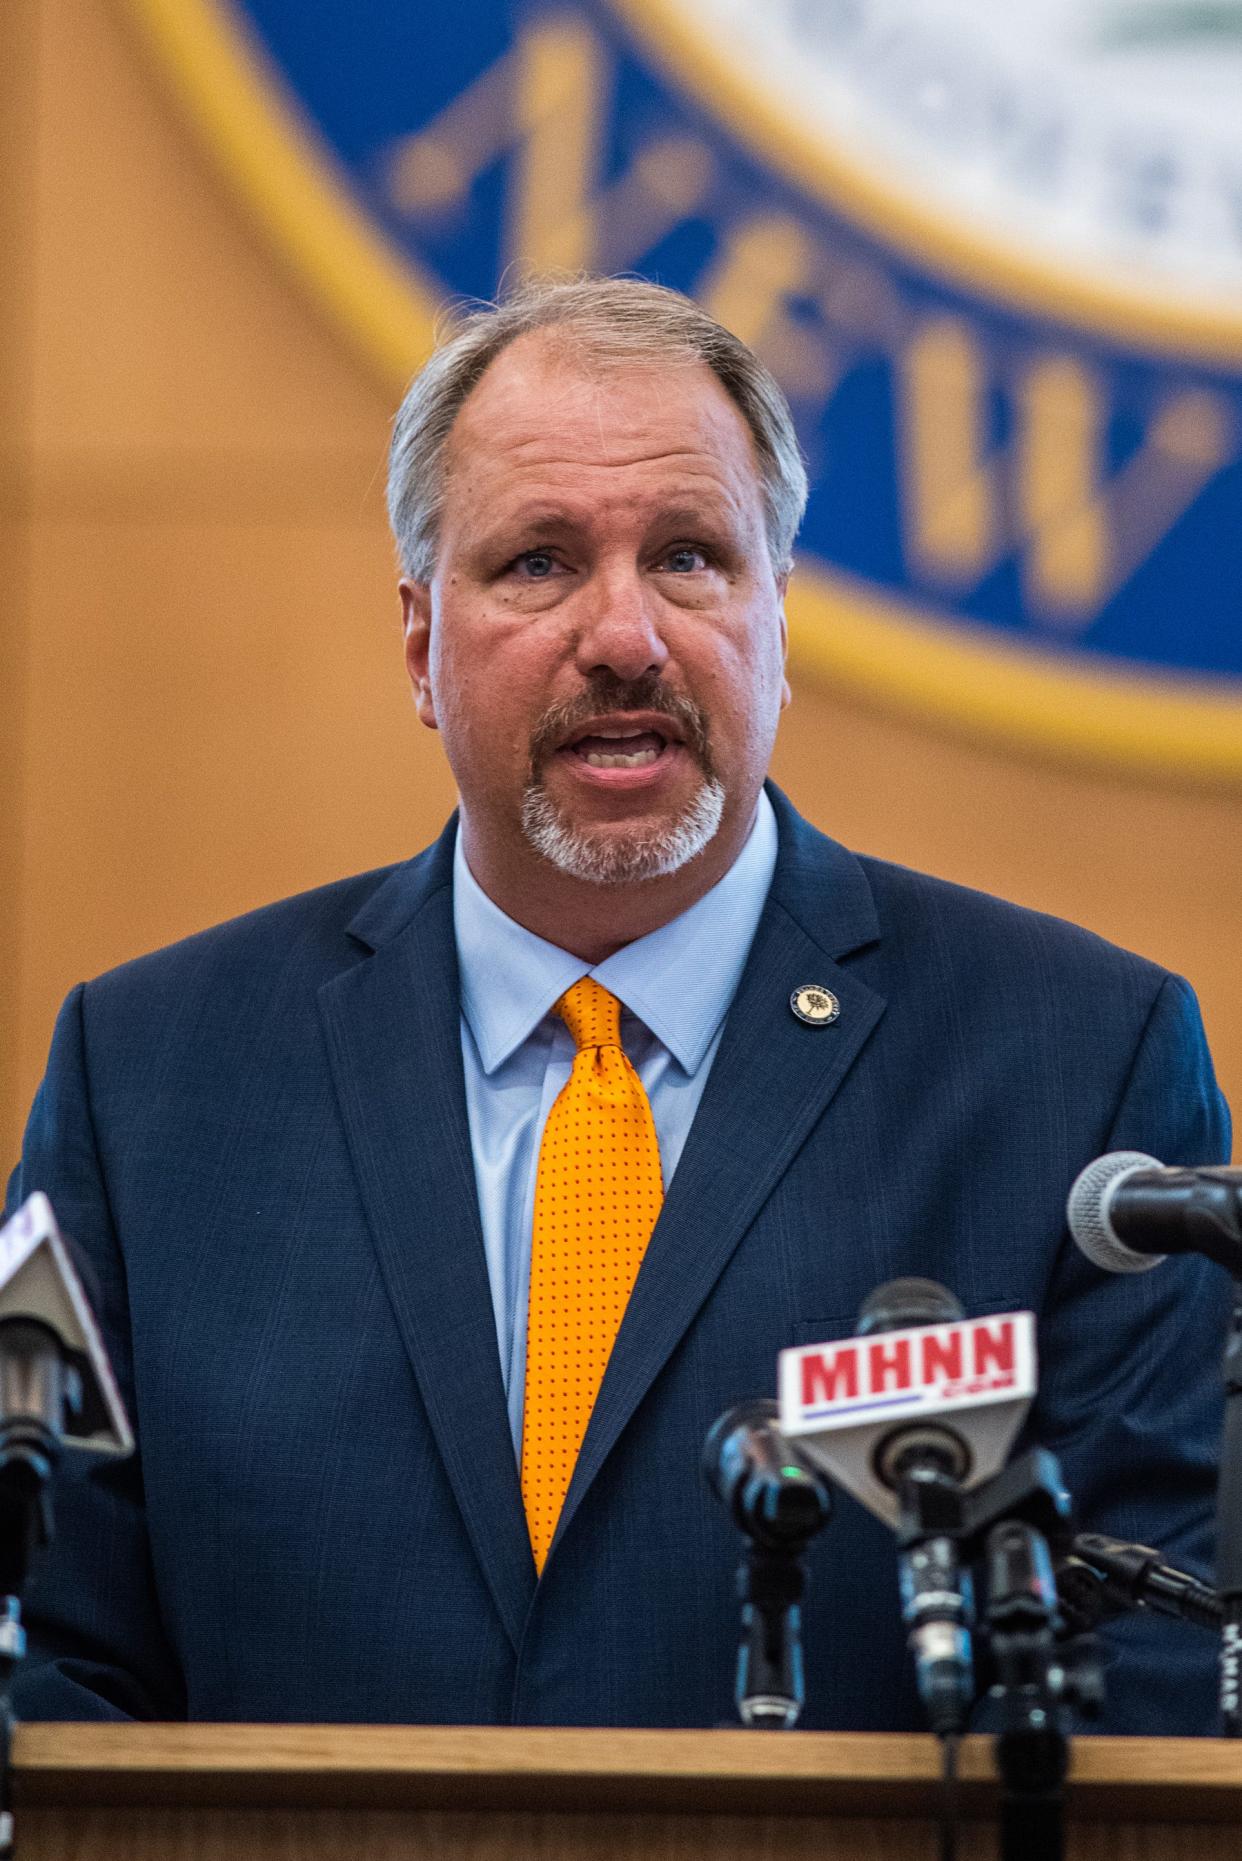 Orange County District Attorney David Hoovler speaks during the press conference in Goshen, NY on Monday, June 21, 2021.